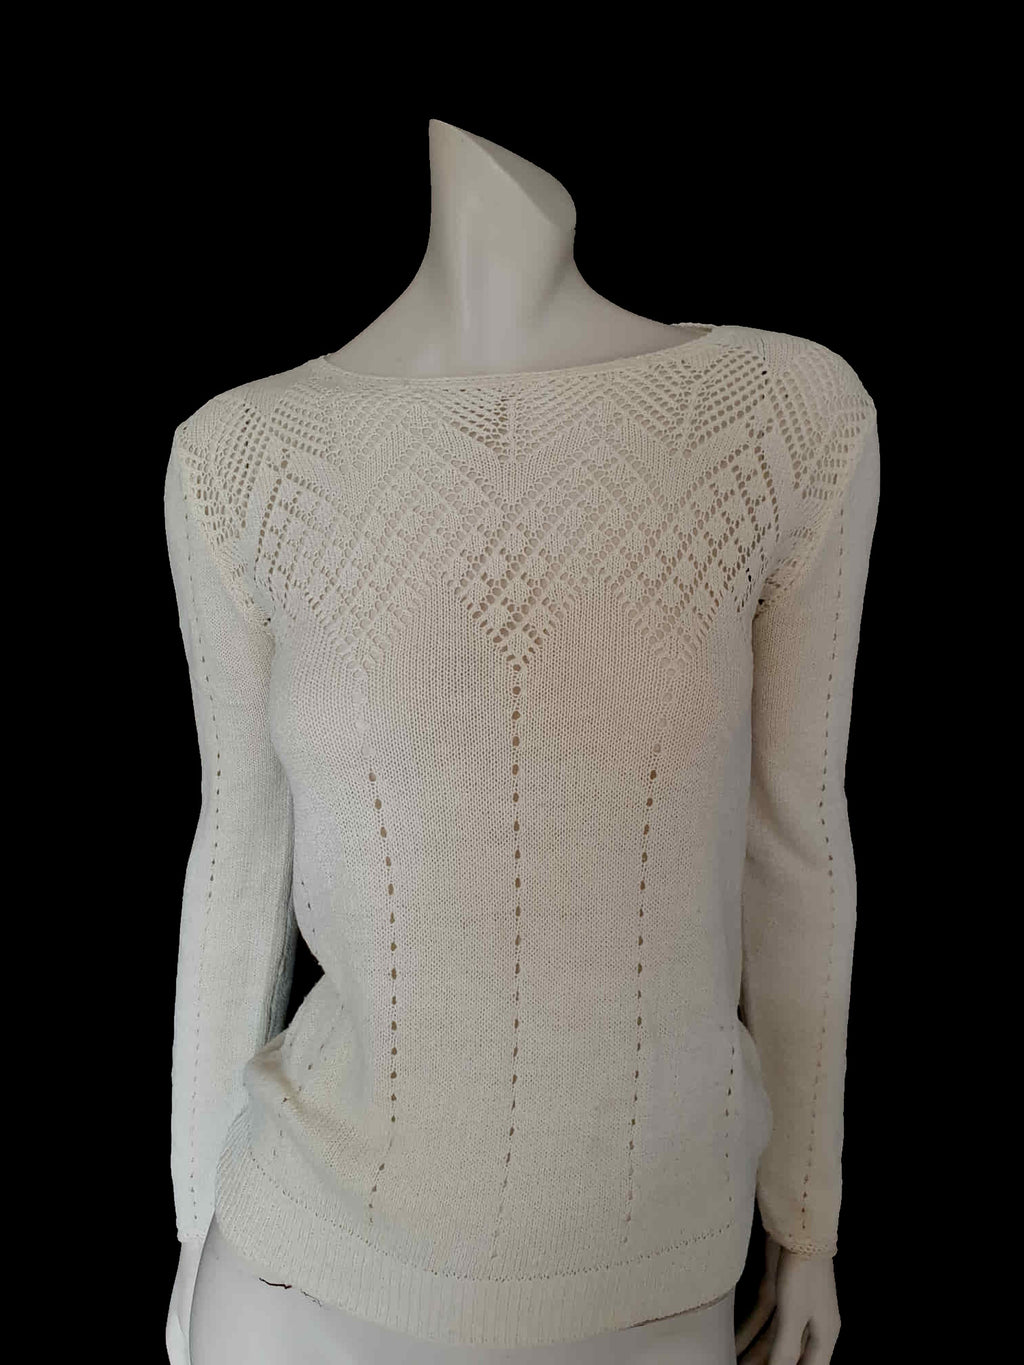 1980s vintage cream lightweight lacy knit jumper pullover small